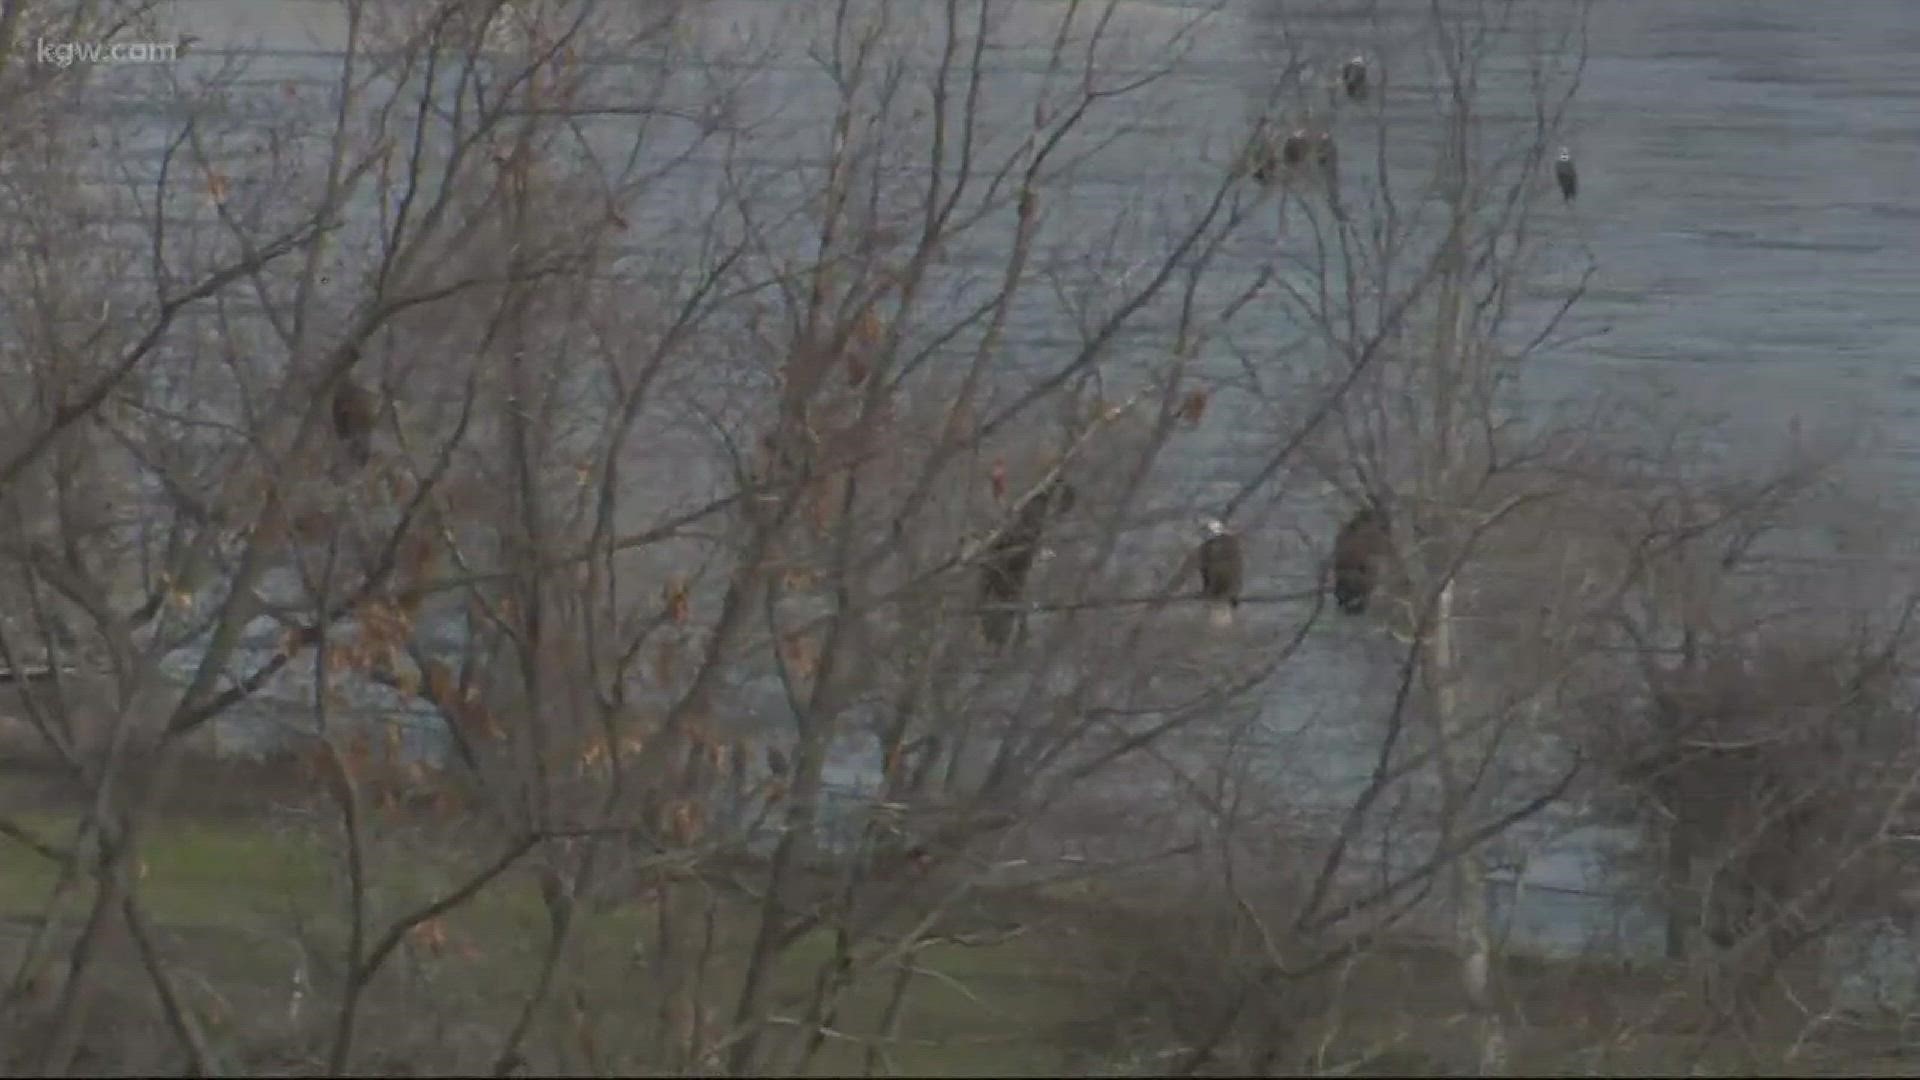 Bald Eagles are gathering at The Dalles Dam.